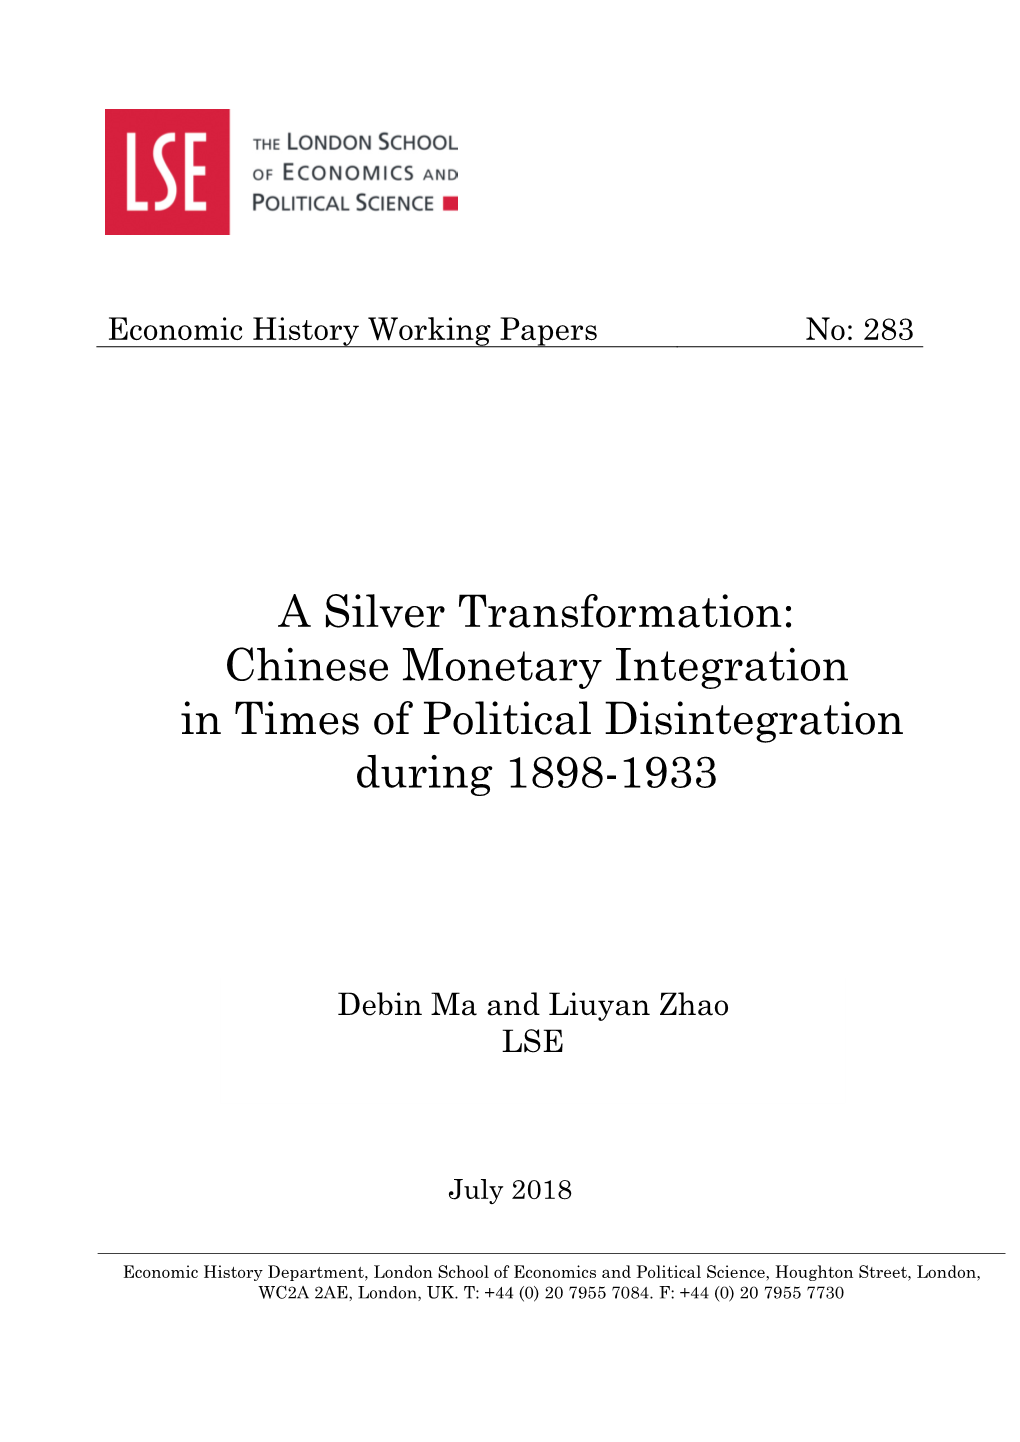 A Silver Transformation: Chinese Monetary Integration in Times of Political Disintegration During 1898–1933* Debin Ma and Liuyan Zhao